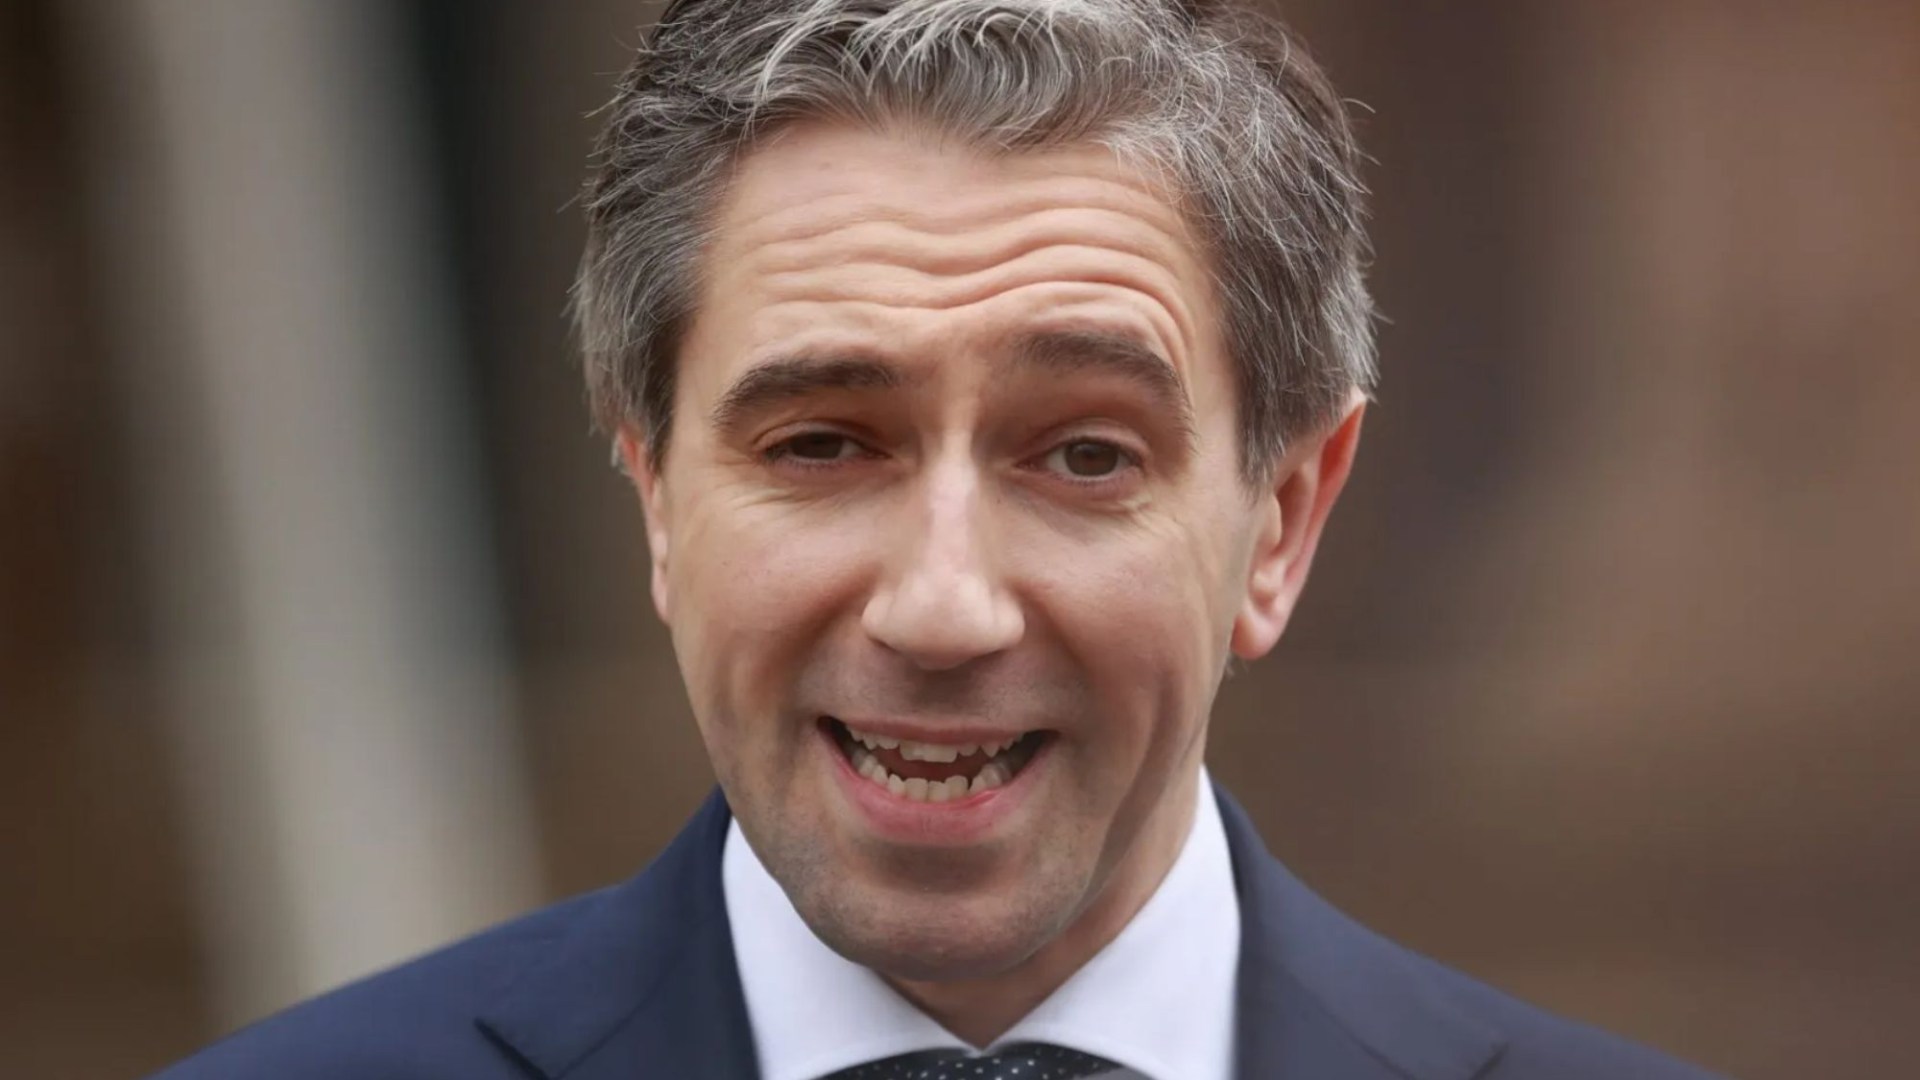 Huge weekly social welfare cut from 232 to 38 for thousands as Harris accused of using immigration as election ploy [Video]